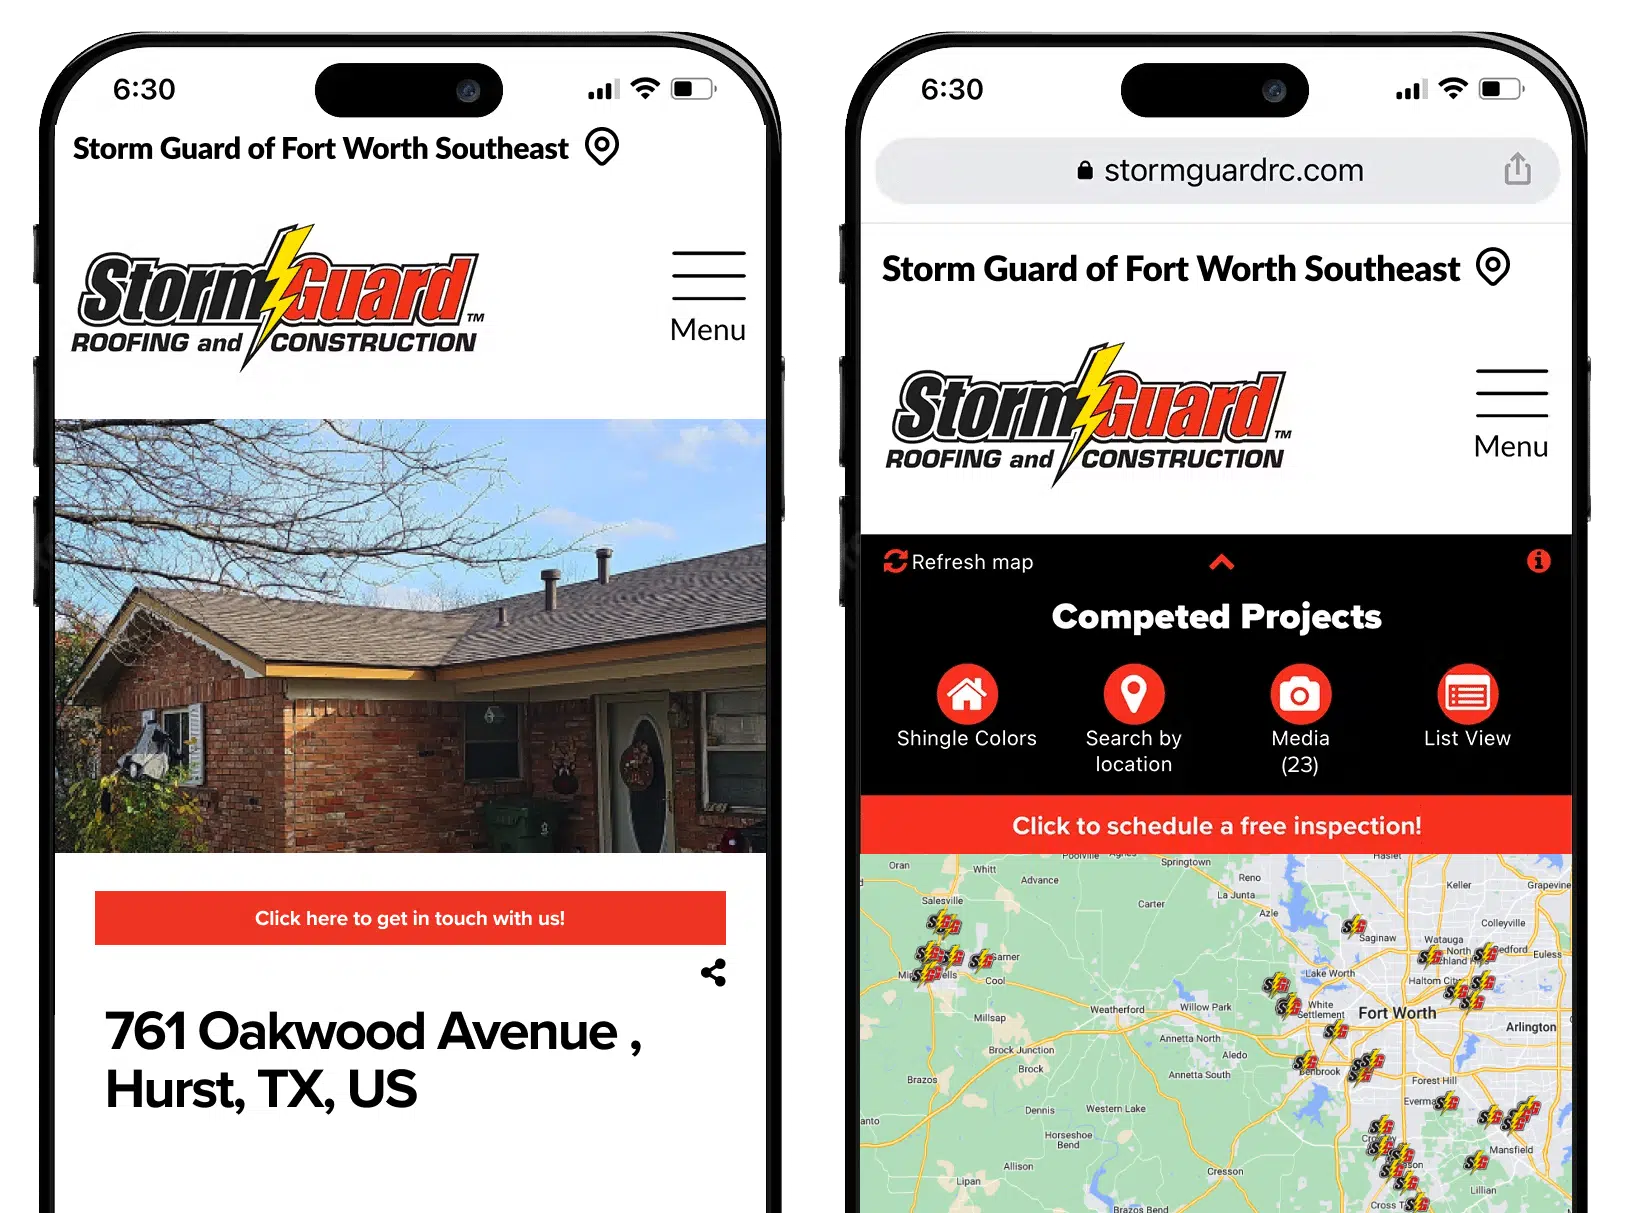 Storm Guard of Fort Worth Southeast, TX roofing projects